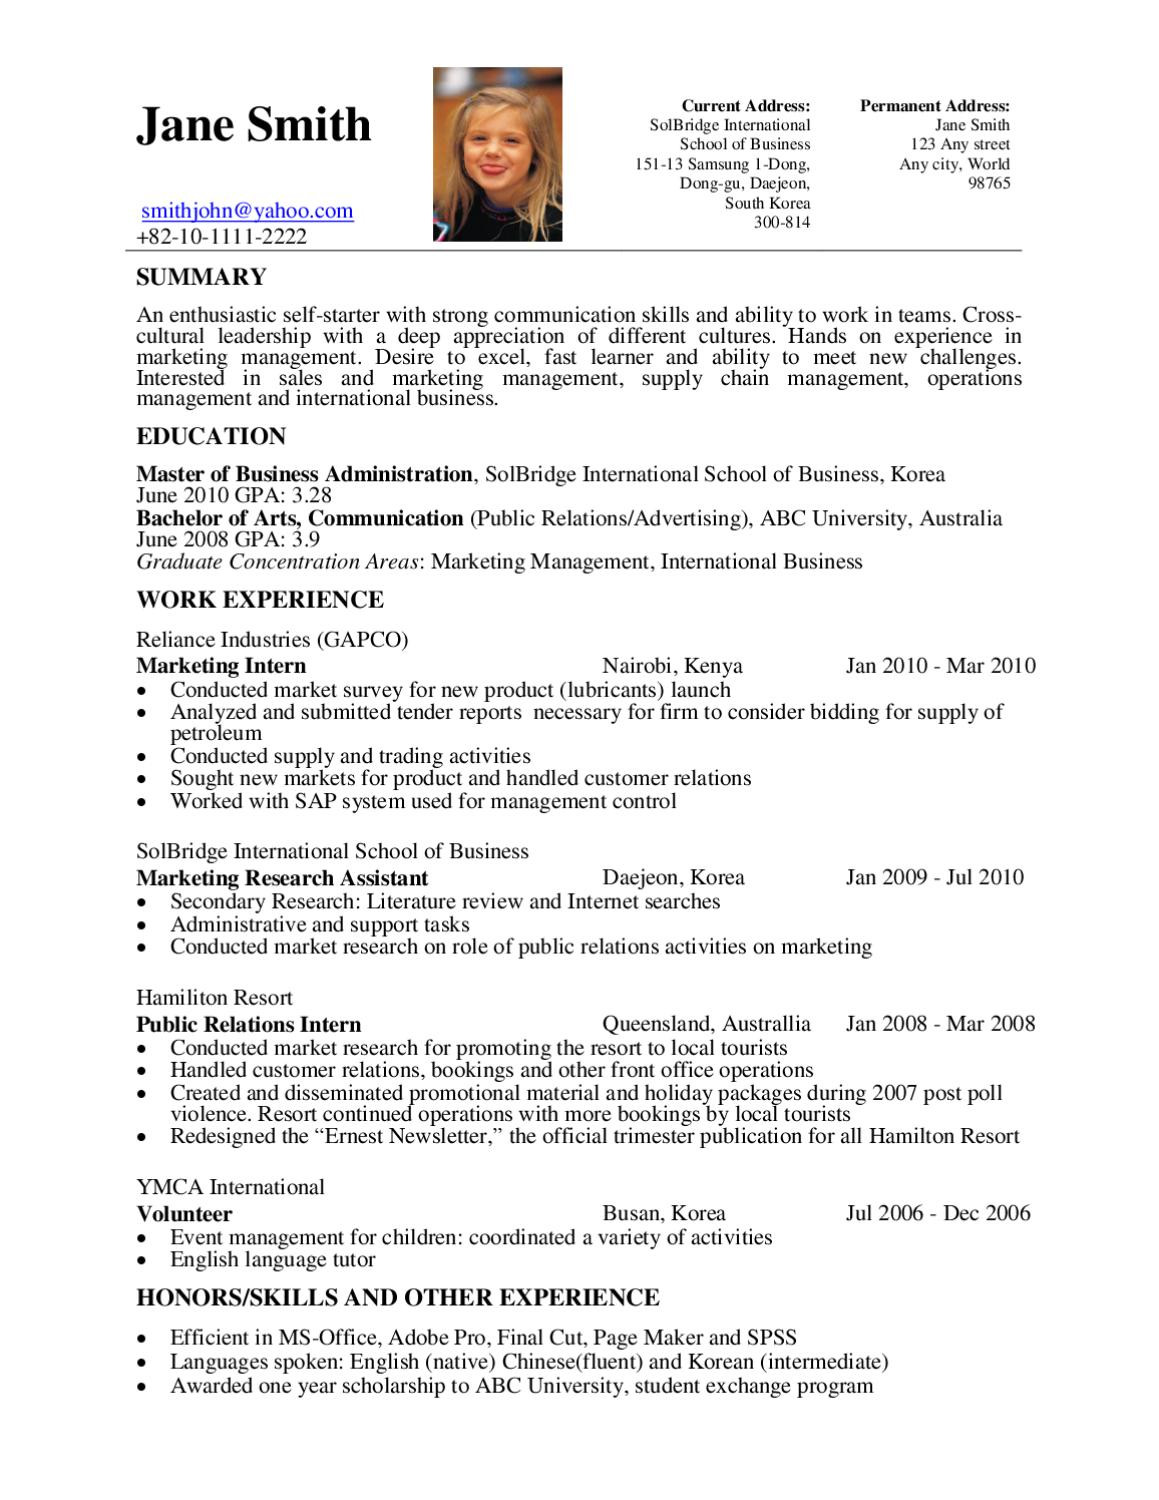 Resume Template with Current and Permanent Address Resume Template by sol Career – issuu